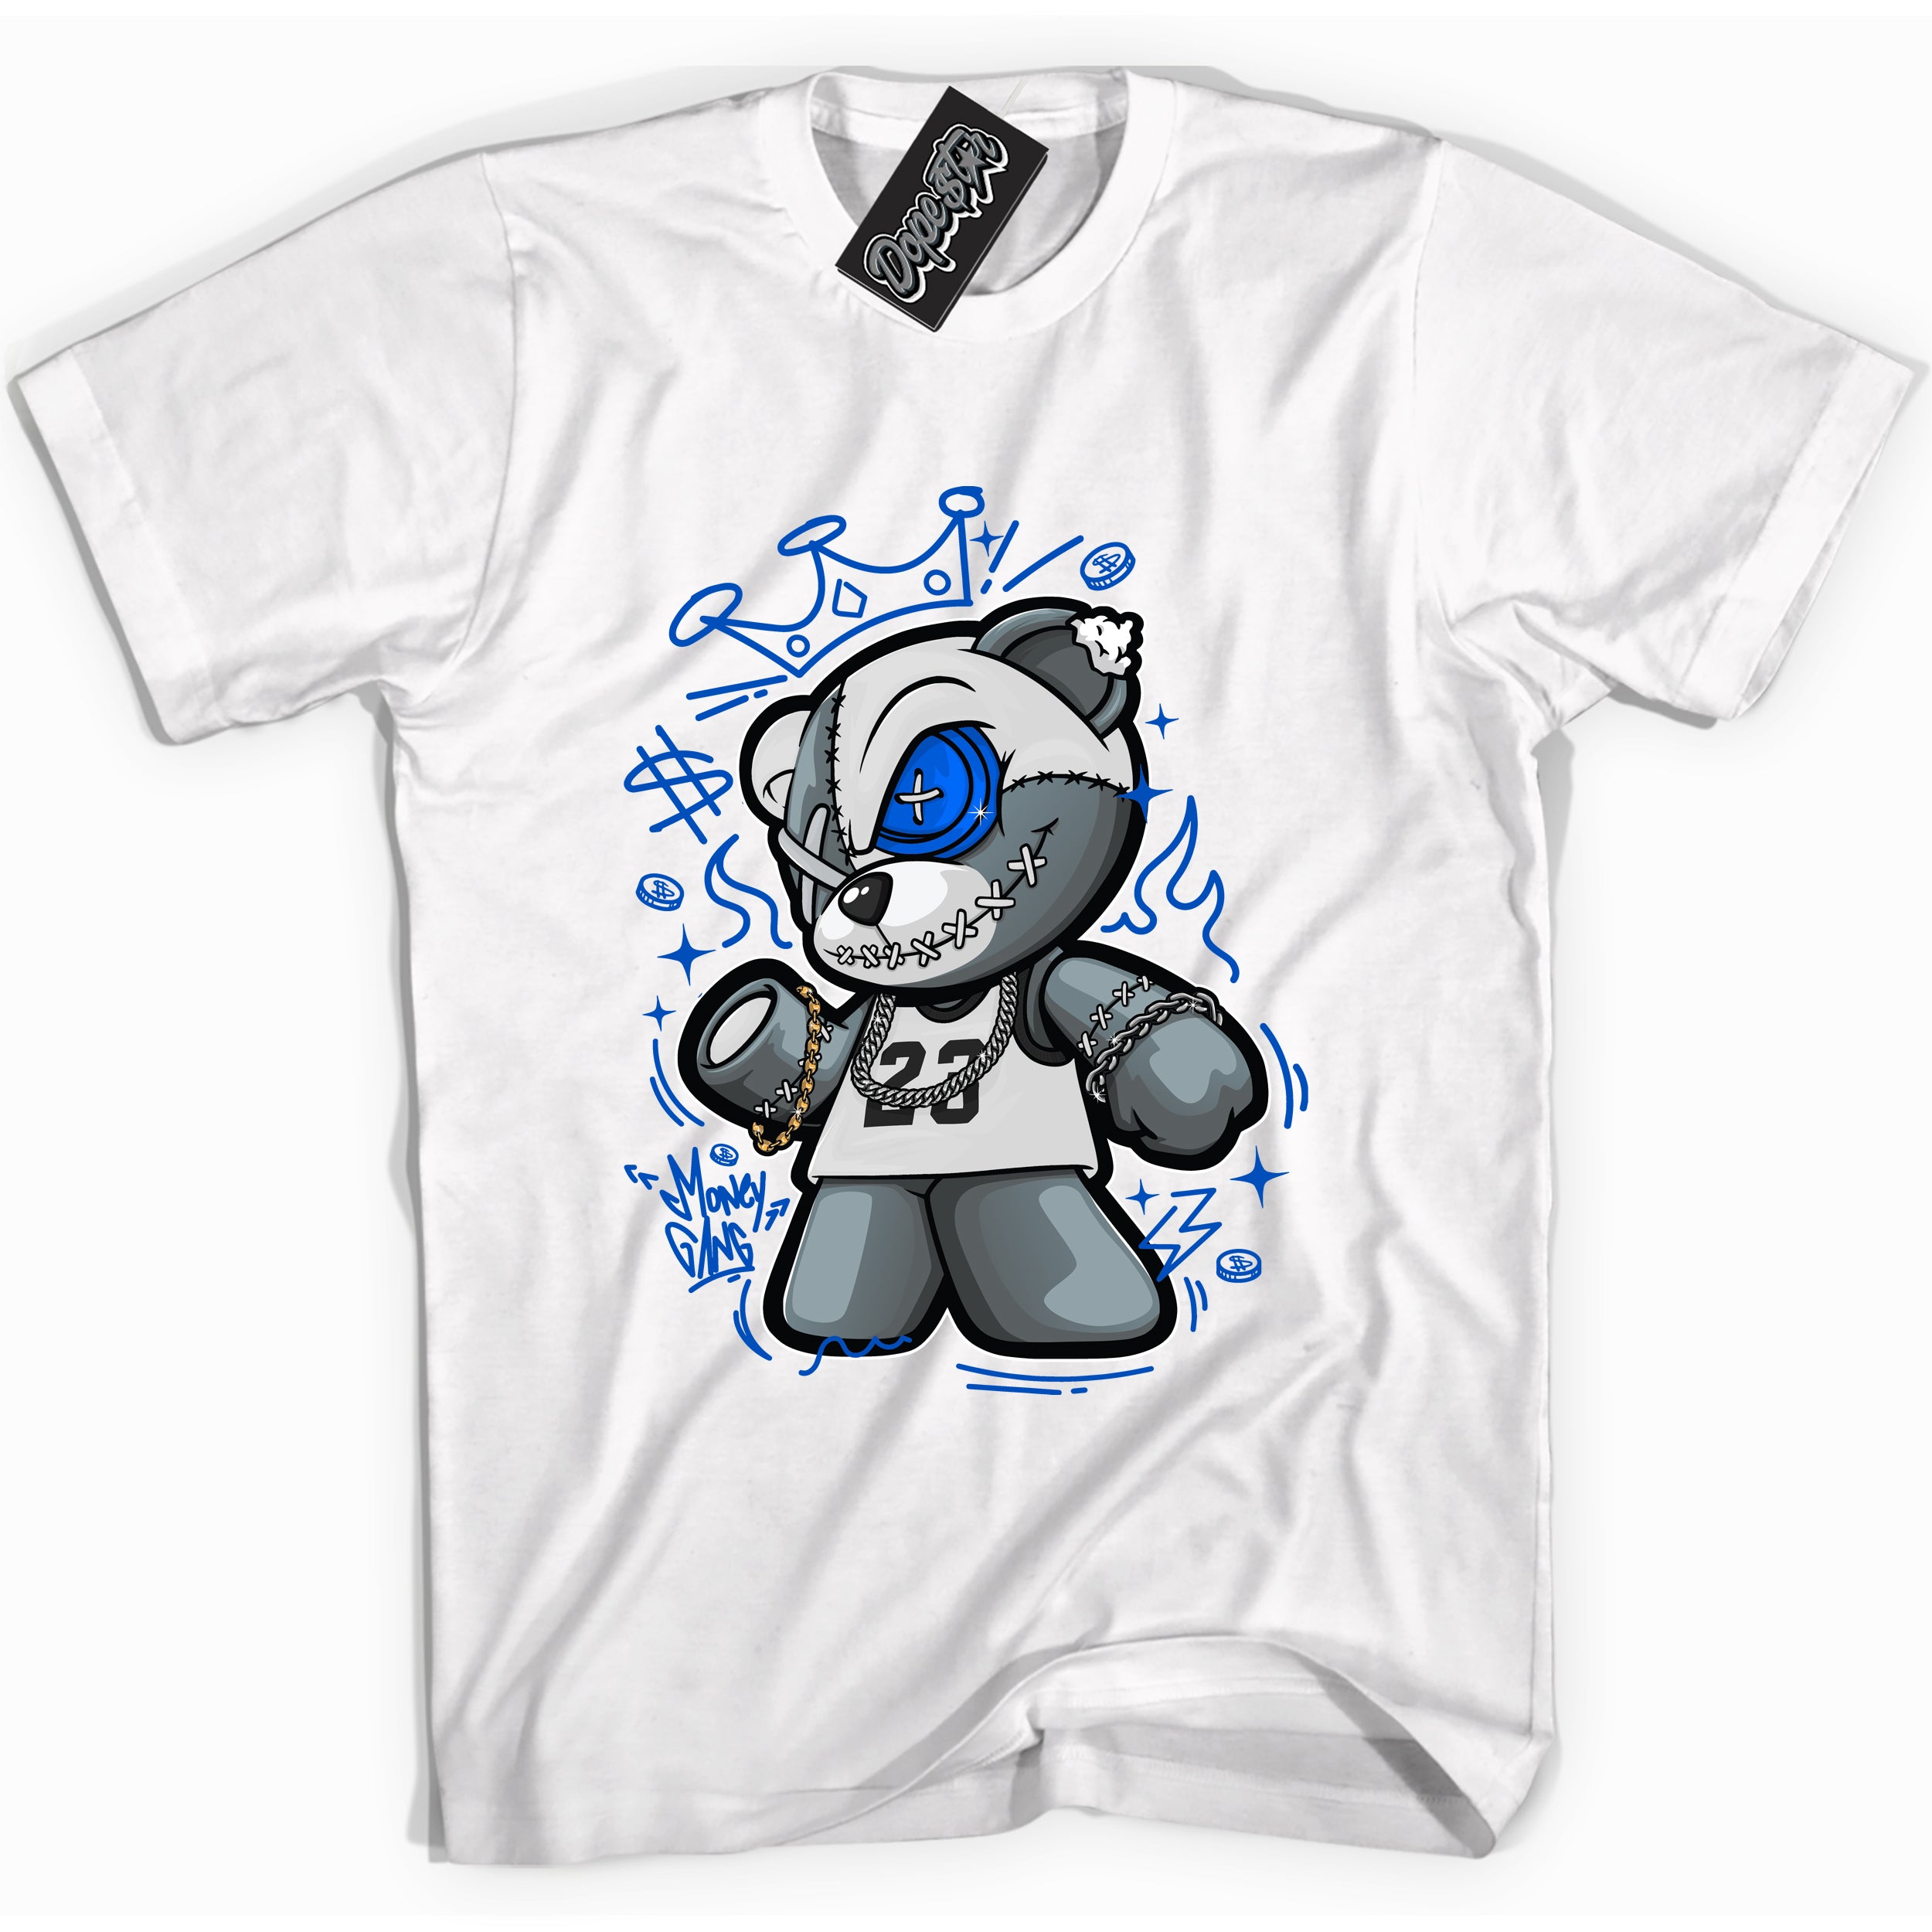 Cool White graphic tee with "Money Gang Bear" design, that perfectly matches Royal Reimagined 1s sneakers 